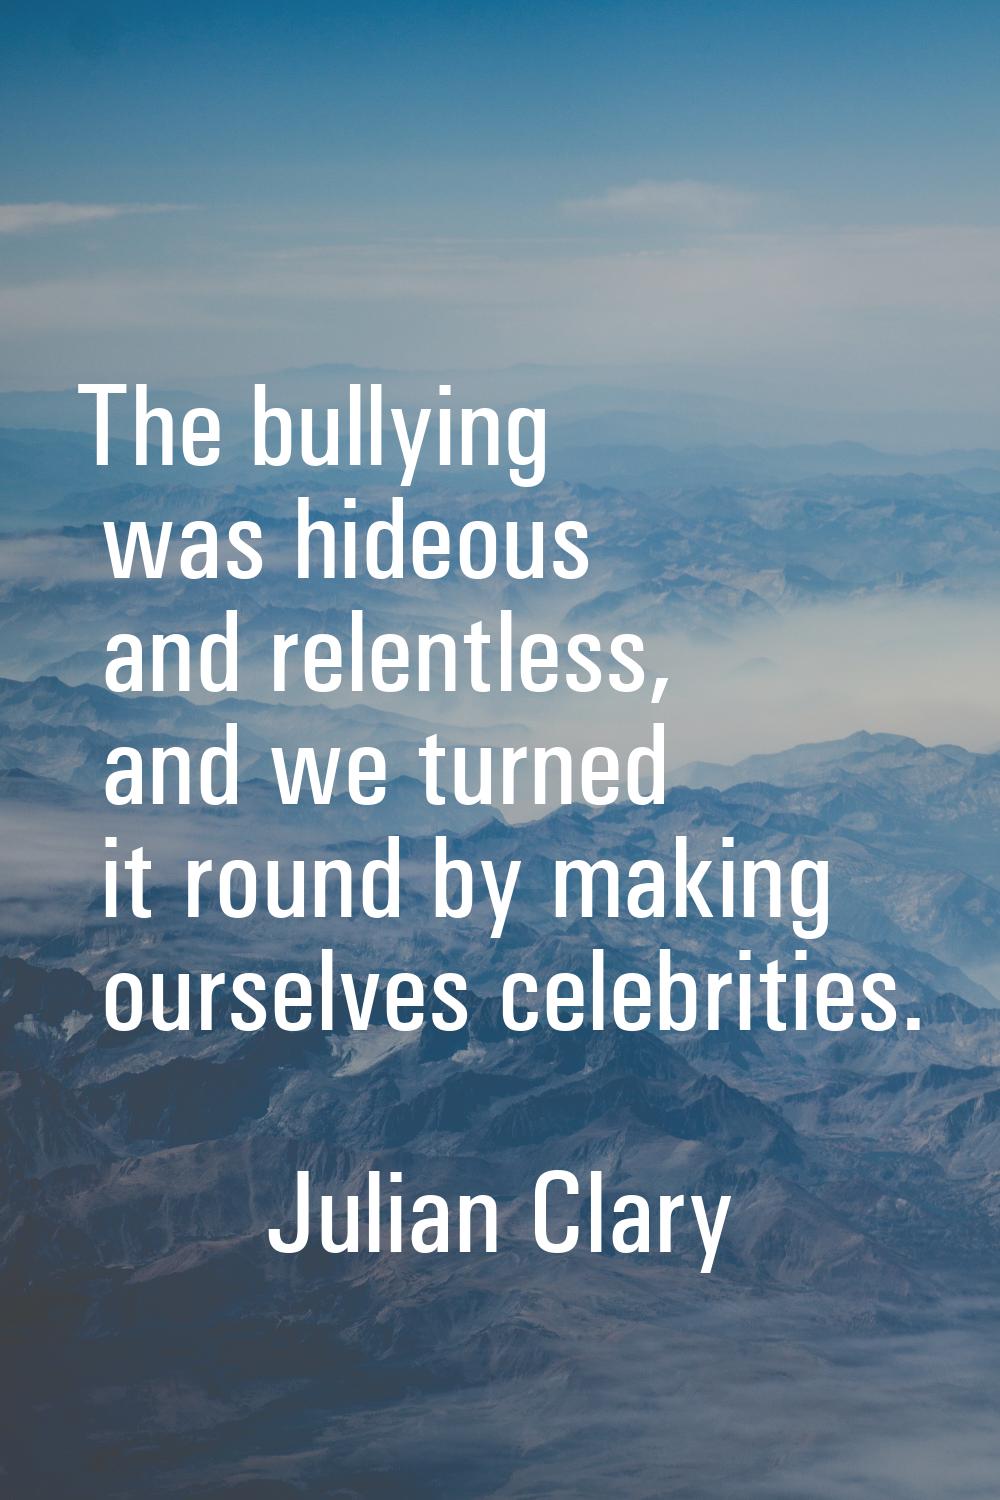 The bullying was hideous and relentless, and we turned it round by making ourselves celebrities.